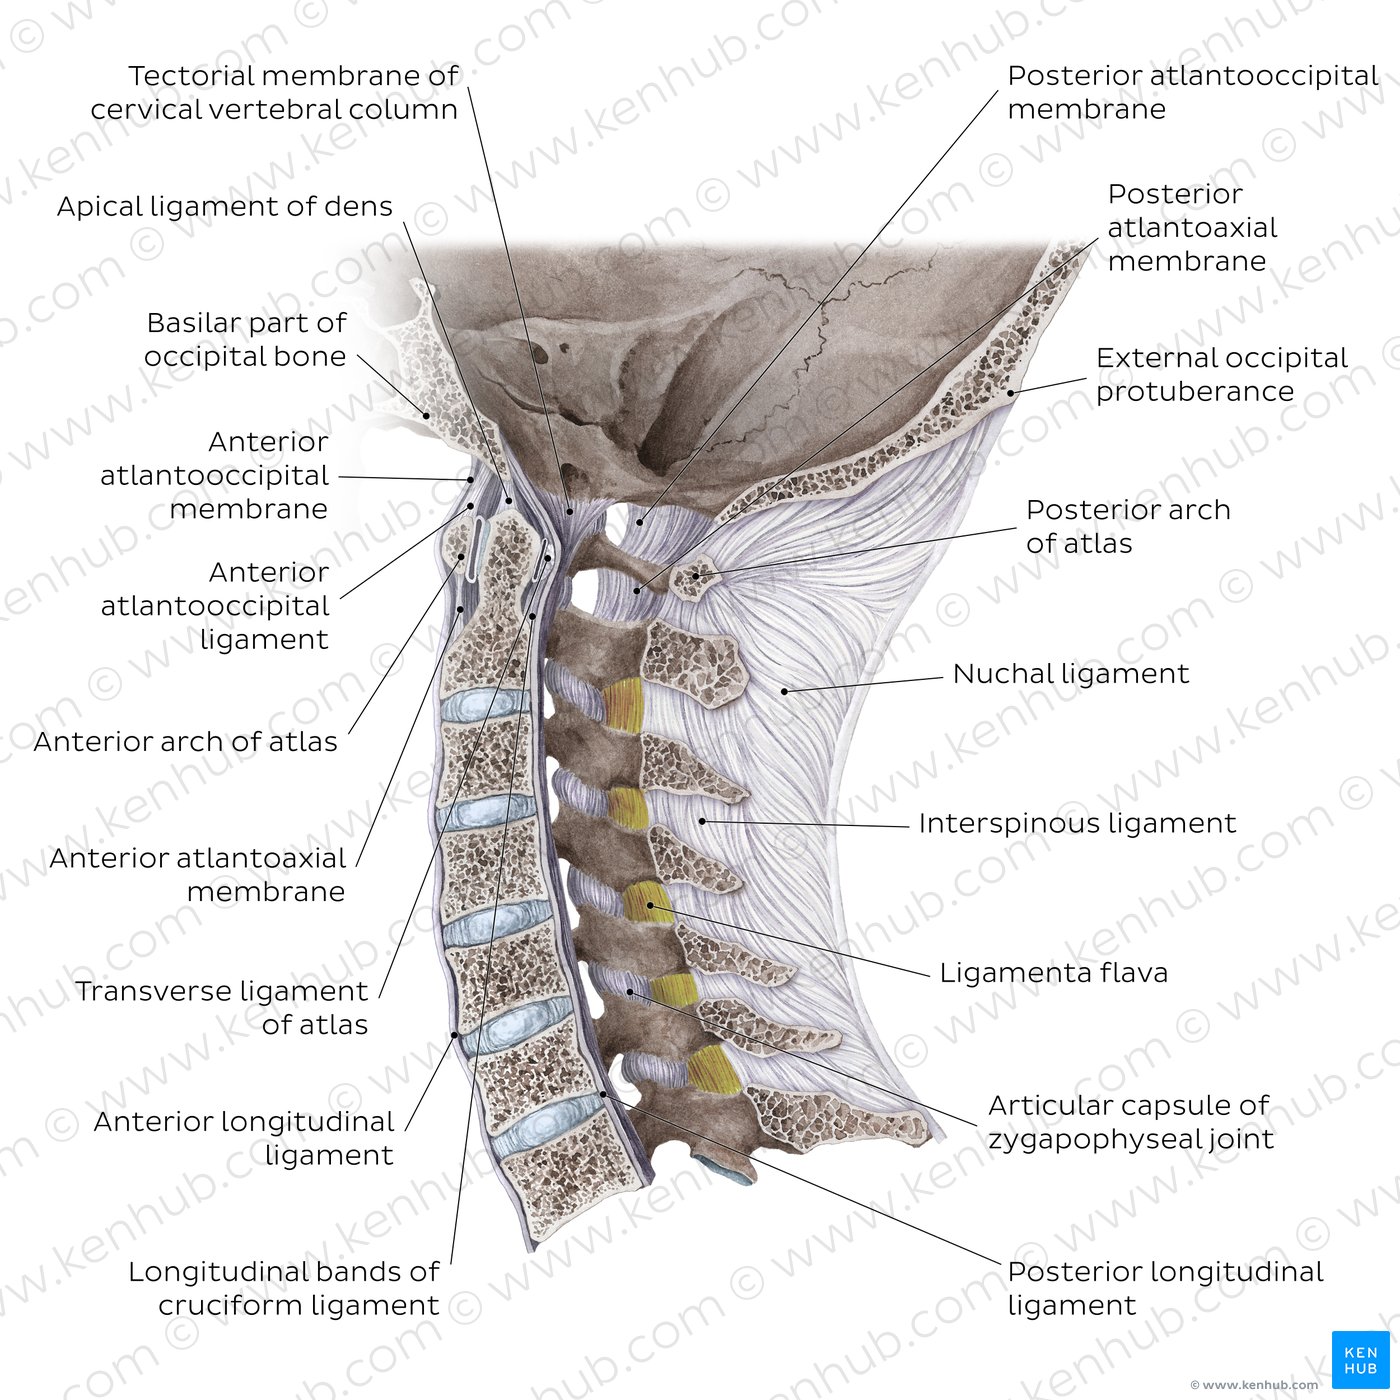 Craniovertebral joints and ligaments: Diagram